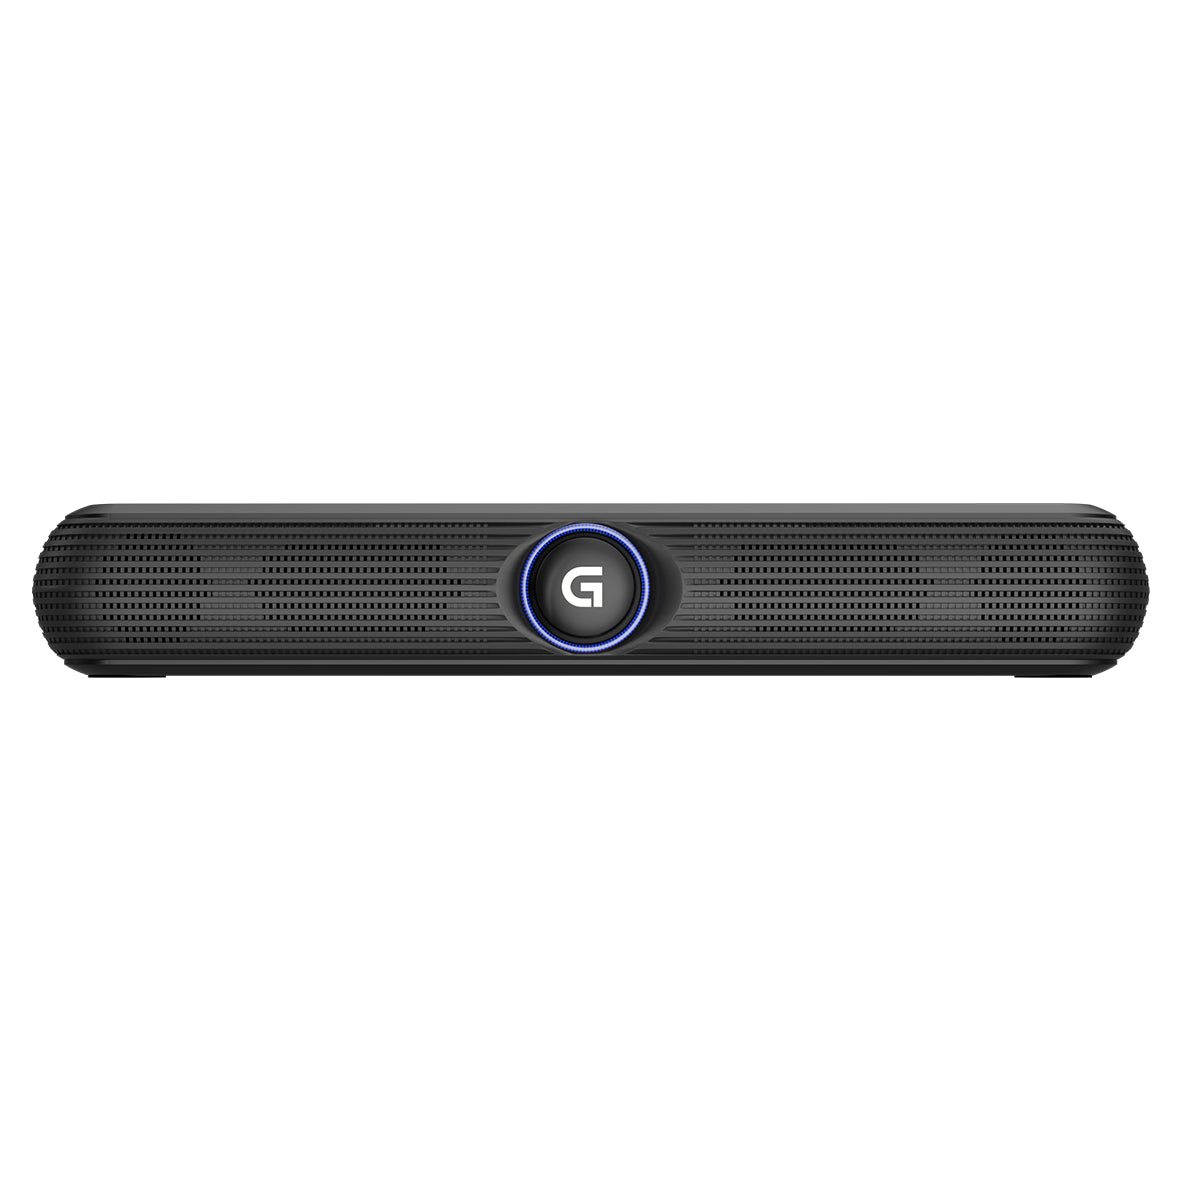 GIZMORE 1000 Pro Wireless Bluetooth Soundbar Speaker, 4Hr Playtime, in-Built Mic & Extra Bass with USB, AUX, SD Card Connectivity and TWS Function